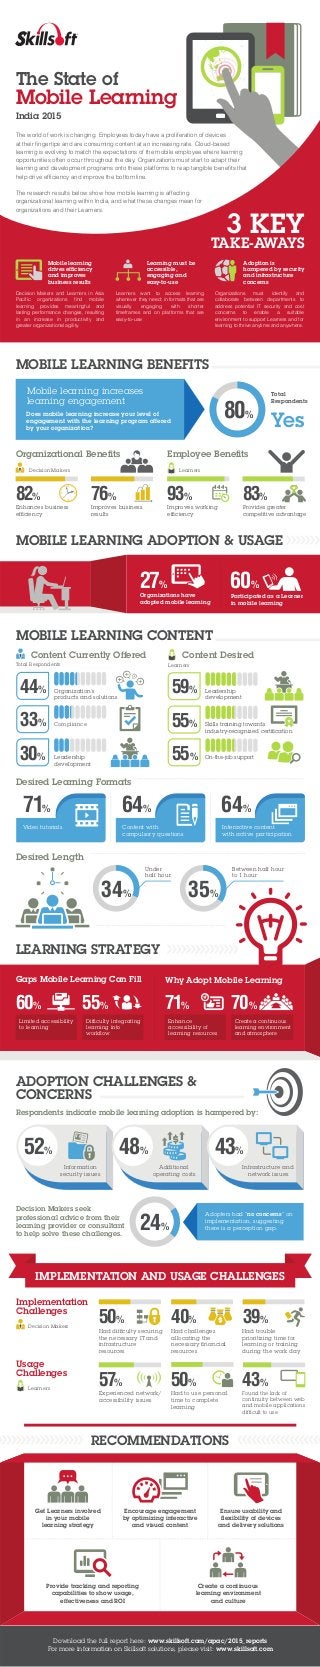 LEARNING STRATEGY
Why Adopt Mobile Learning
71%
Enhance
accessibility of
learning resources
70%
Create a continuous
learning environment
and atmosphere
Gaps Mobile Learning Can Fill
55%
Difﬁculty integrating
learning into
workﬂow
60%
Limited accessibility
to learning
MOBILE LEARNING ADOPTION & USAGE
60%
Participated as a Learner
in mobile learning
27%
Organizations have
adopted mobile learning
IMPLEMENTATION AND USAGE CHALLENGES
Learners
Usage
Challenges
Found the lack of
continuity between web
and mobile applications
difﬁcult to use
43%
Experienced network/
accessibility issues
57%
Had to use personal
time to complete
learning
50%
Implementation
Challenges
Decision Makers
Had difﬁculty securing
the necessary IT and
infrastructure
resources
50%
Had challenges
allocating the
necessary ﬁnancial
resources
40%
Had trouble
prioritizing time for
learning or training
during the work day
39%
MOBILE LEARNING BENEFITS
Does mobile learning increase your level of
engagement with the learning program offered
by your organization?
Mobile learning increases
learning engagement
80%
Total
Respondents
Yes
Organizational Beneﬁts
Decision Makers
Improves business
results
76%
Enhances business
efﬁciency
82%
Learners
Employee Beneﬁts
Improves working
efﬁciency
93%
Provides greater
competitive advantage
83%
Video tutorials
71% 64%
Content with
compulsory questions
Interactive content
with active participation
64%
Desired Learning Formats
ADOPTION CHALLENGES &
CONCERNS
Respondents indicate mobile learning adoption is hampered by:
24%
Decision Makers seek
professional advice from their
learning provider or consultant
to help solve these challenges.
Adopters had “no concerns” on
implementation, suggesting
there is a perception gap.
Information
security issues
52%
Additional
operating costs
48%
Infrastructure and
network issues
43%
Desired Length
Under
half hour
Between half hour
to 1 hour
34% 35%
Download the full report here: www.skillsoft.com/apac/2015_reports
For more information on Skillsoft solutions, please visit: www.skillsoft.com
RECOMMENDATIONS
Encourage engagement
by optimizing interactive
and visual content
Provide tracking and reporting
capabilities to show usage,
effectiveness and ROI
Get Learners involved
in your mobile
learning strategy
Create a continuous
learning environment
and culture
Ensure usability and
ﬂexibility of devices
and delivery solutions
3 KEY
TAKE-AWAYS
Mobile learning
drives efﬁciency
and improves
business results
Decision Makers and Learners in Asia
Pacific organizations find mobile
learning provides meaningful and
lasting performance changes, resulting
in an increase in productivity and
greater organizational agility.
Learning must be
accessible,
engaging and
easy-to-use
Learners want to access learning
whenever they need; in formats that are
visually engaging with shorter
timeframes and on platforms that are
easy-to-use
Adoption is
hampered by security
and infrastructure
concerns
Organizations must identify and
collaborate between departments to
address potential IT security and cost
concerns to enable a suitable
environment to support Learners and for
learning to thrive anytime and anywhere.
The State of
Mobile Learning
India 2015
The world of work is changing. Employees today have a proliferation of devices
at their fingertips and are consuming content at an increasing rate. Cloud-based
learning is evolving to match the expectations of the mobile employee where learning
opportunities often occur throughout the day. Organizations must start to adapt their
learning and development programs onto these platforms to reap tangible benefits that
help drive efficiency and improve the bottom line.
The research results below show how mobile learning is affecting
organizational learning within India, and what these changes mean for
organizations and their Learners.
MOBILE LEARNING CONTENT
Leadership
development
30%
Compliance33%
Content Currently Offered
Total Respondents
Organization’s
products and solutions
44%
Learners
Content Desired
Leadership
development
59%
On-the-job support55%
55% Skills training towards
industry-recognized certiﬁcation
 